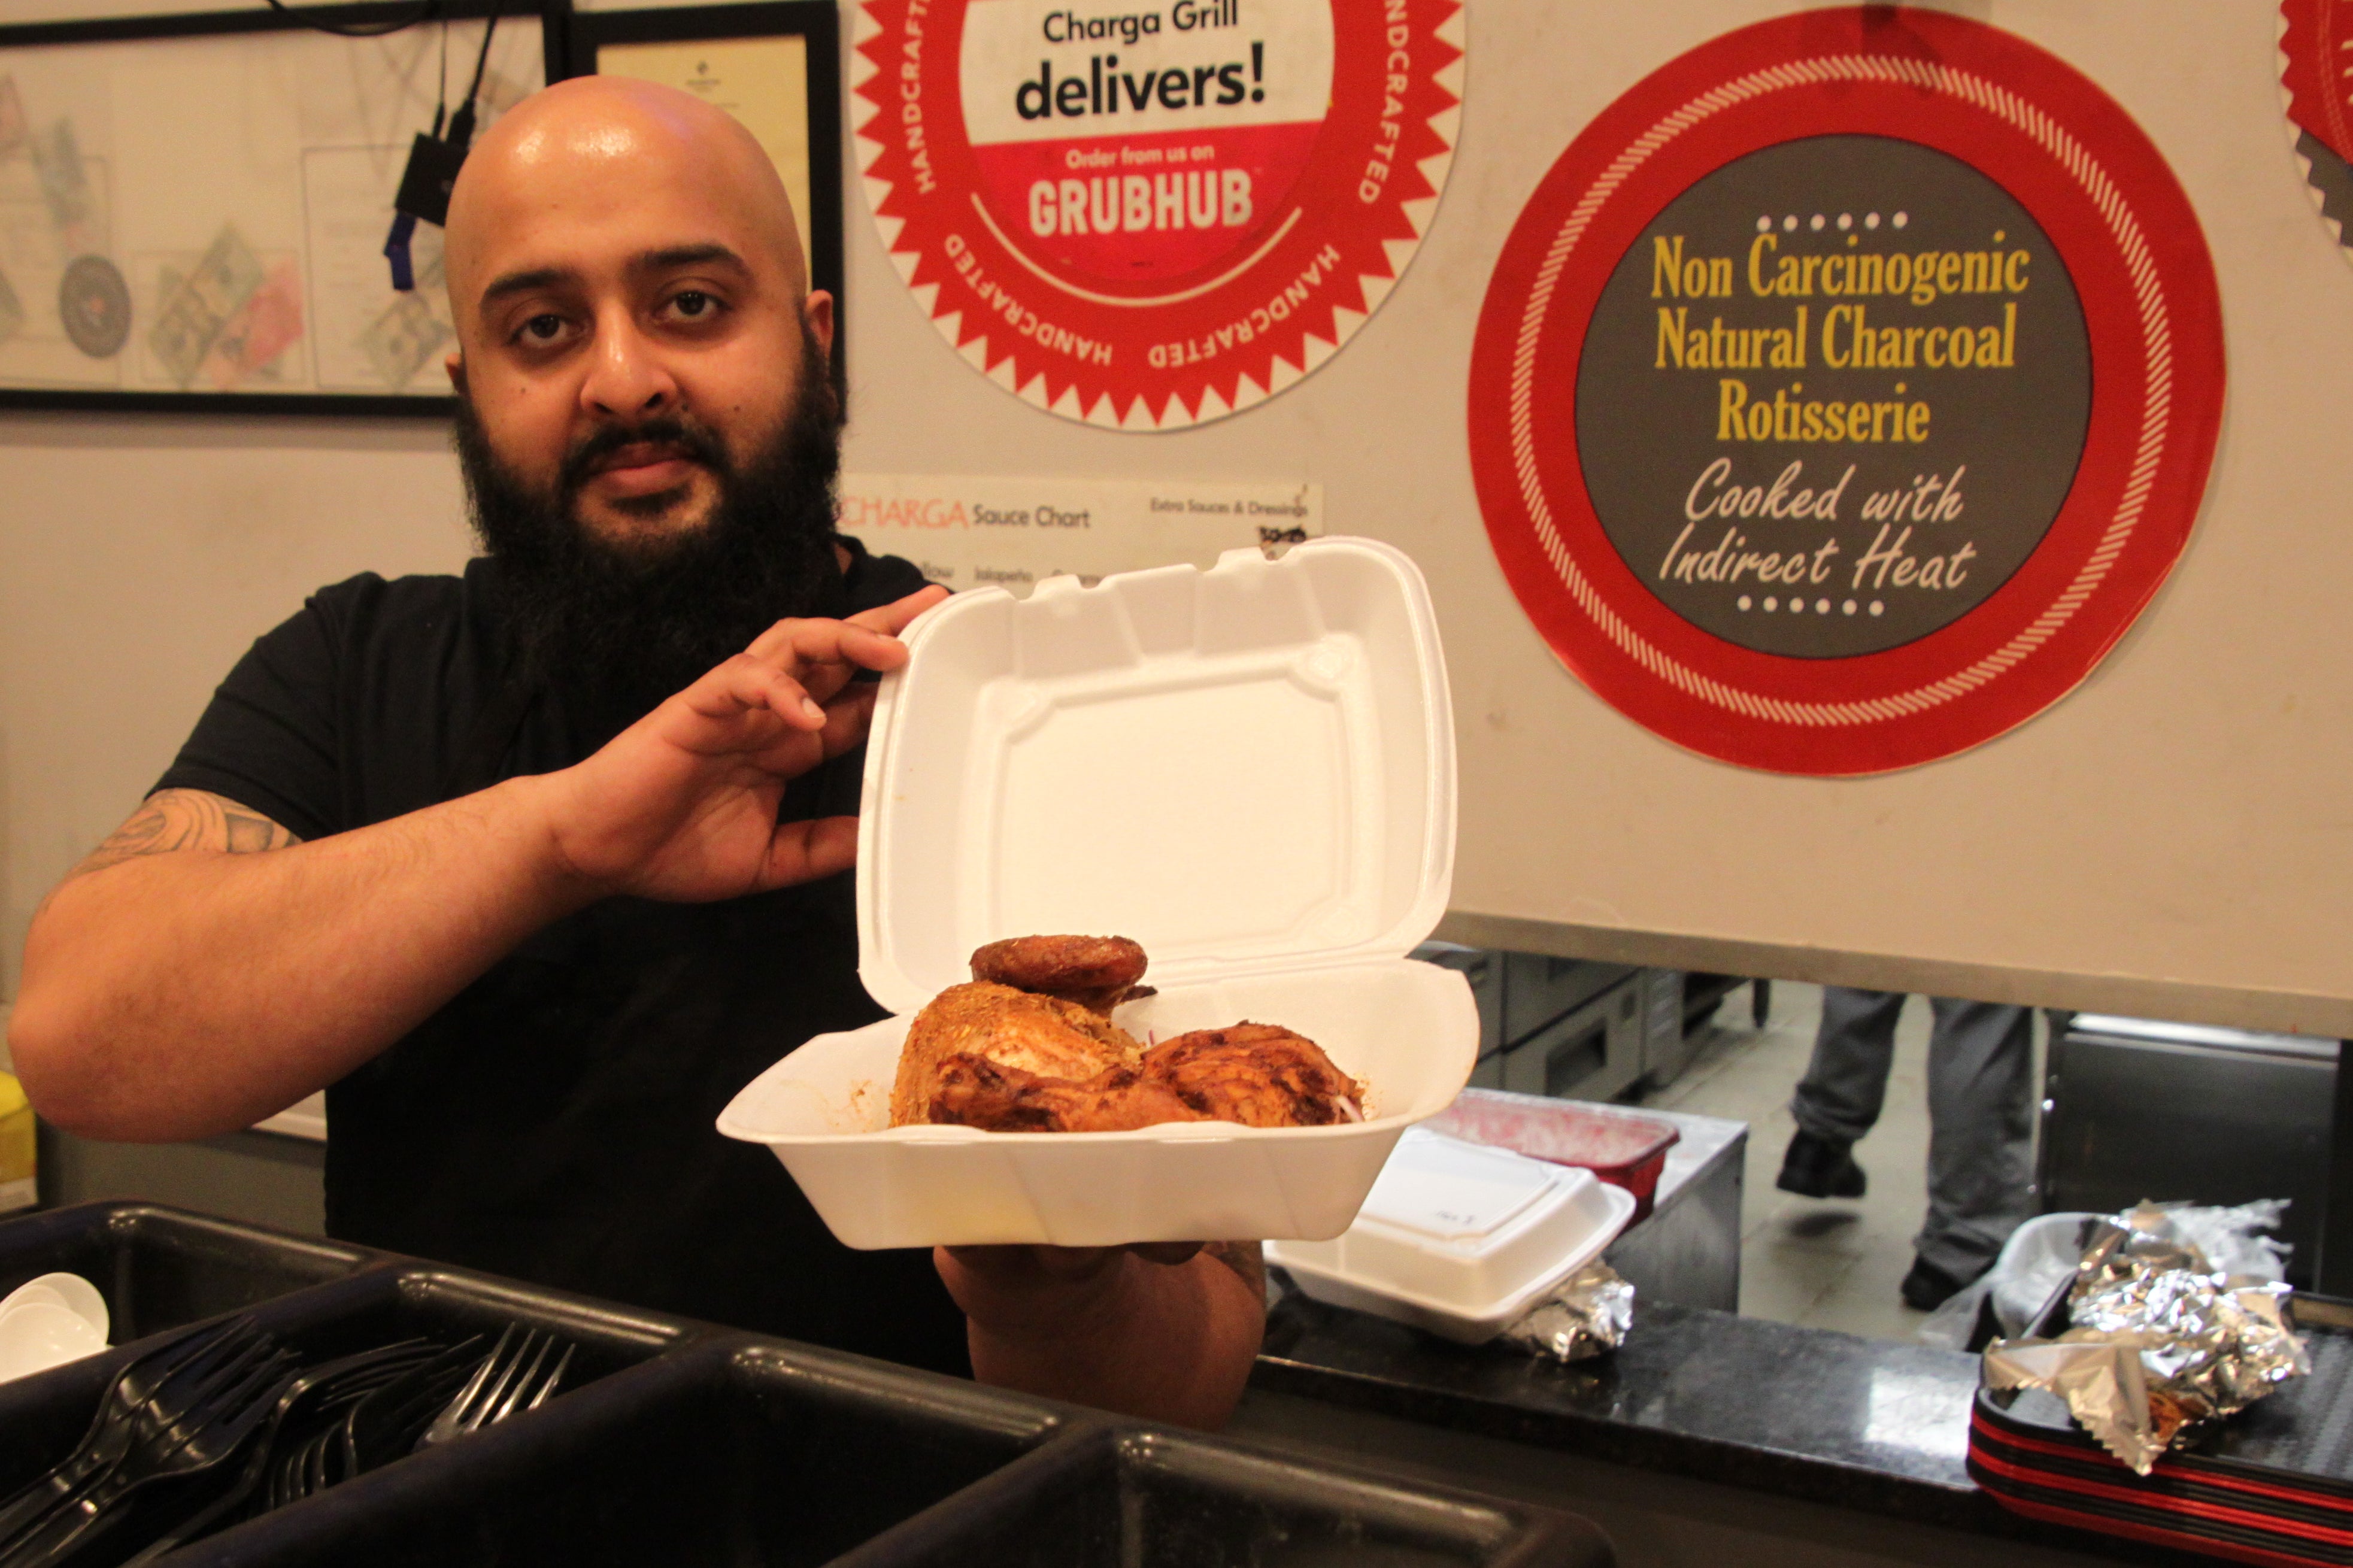 A man with a dark beard holds a Styrofoam container with a spiced roasted chicken inside.